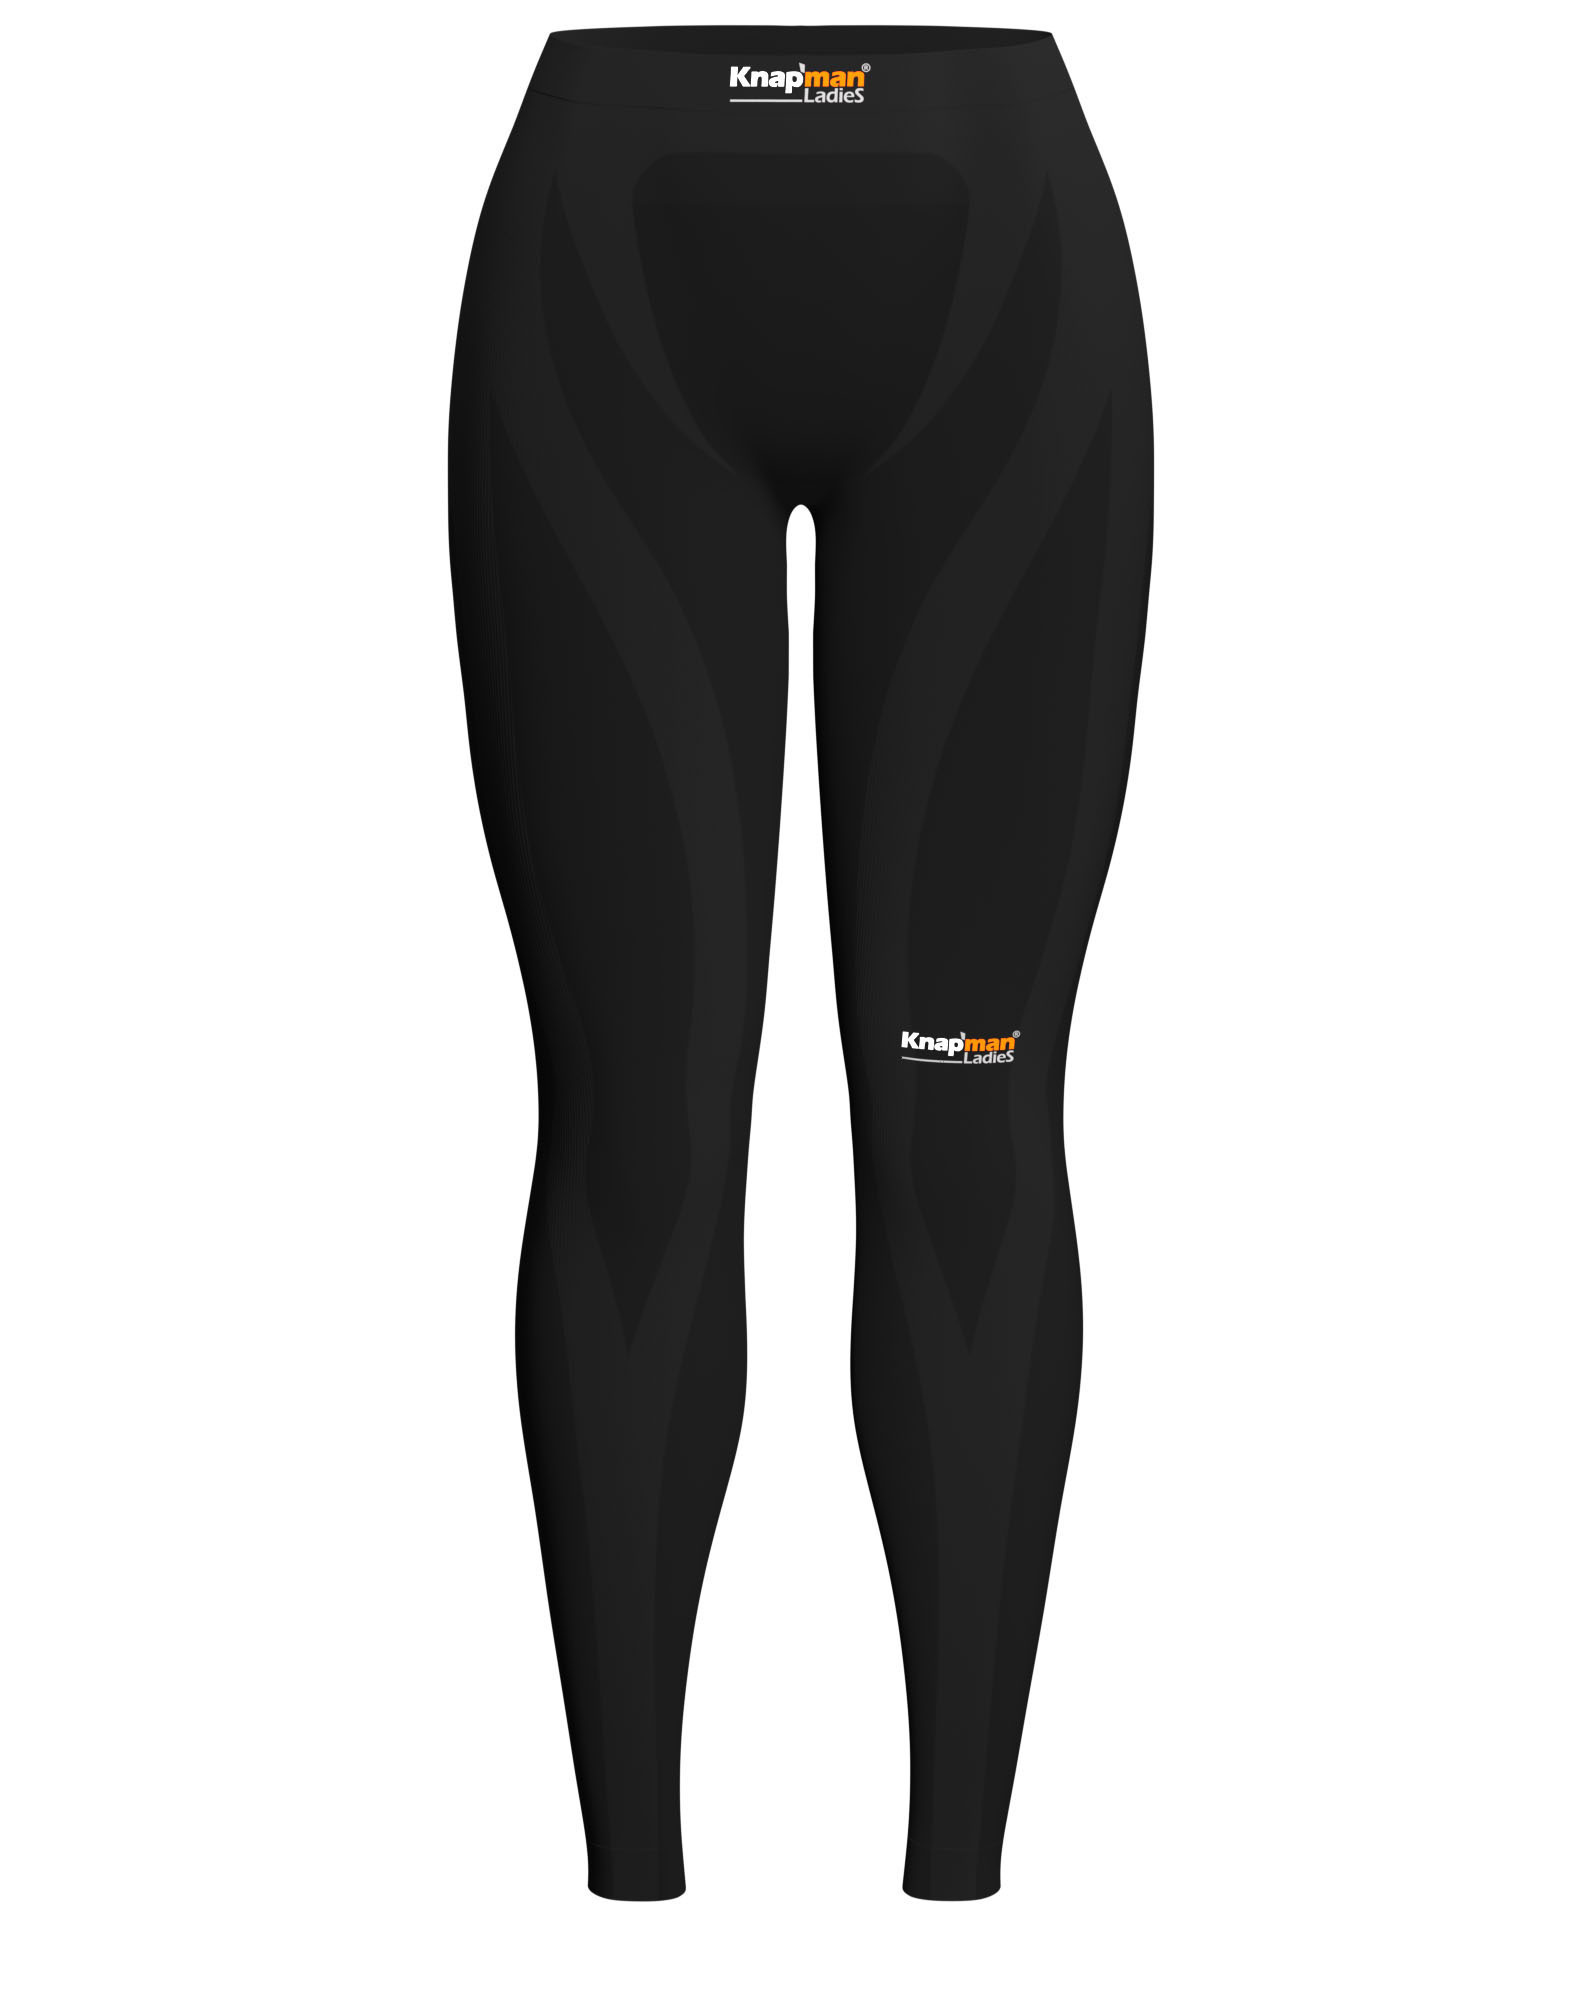 Knap'man Ladies Zoned Compression Tights 25%